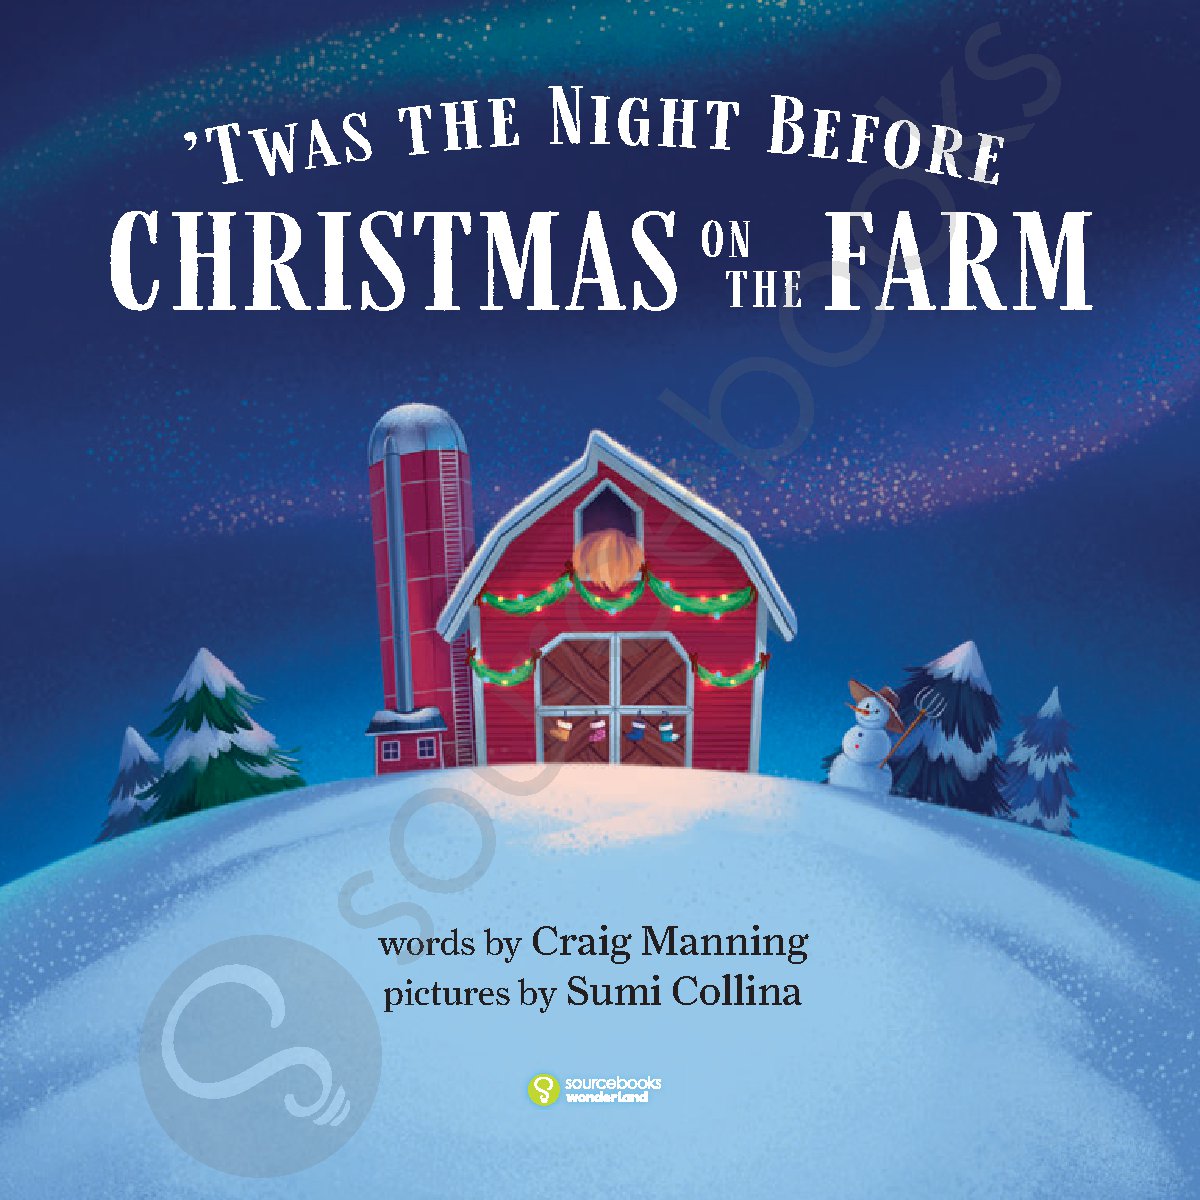 'Twas the Night Before Christmas on the Farm